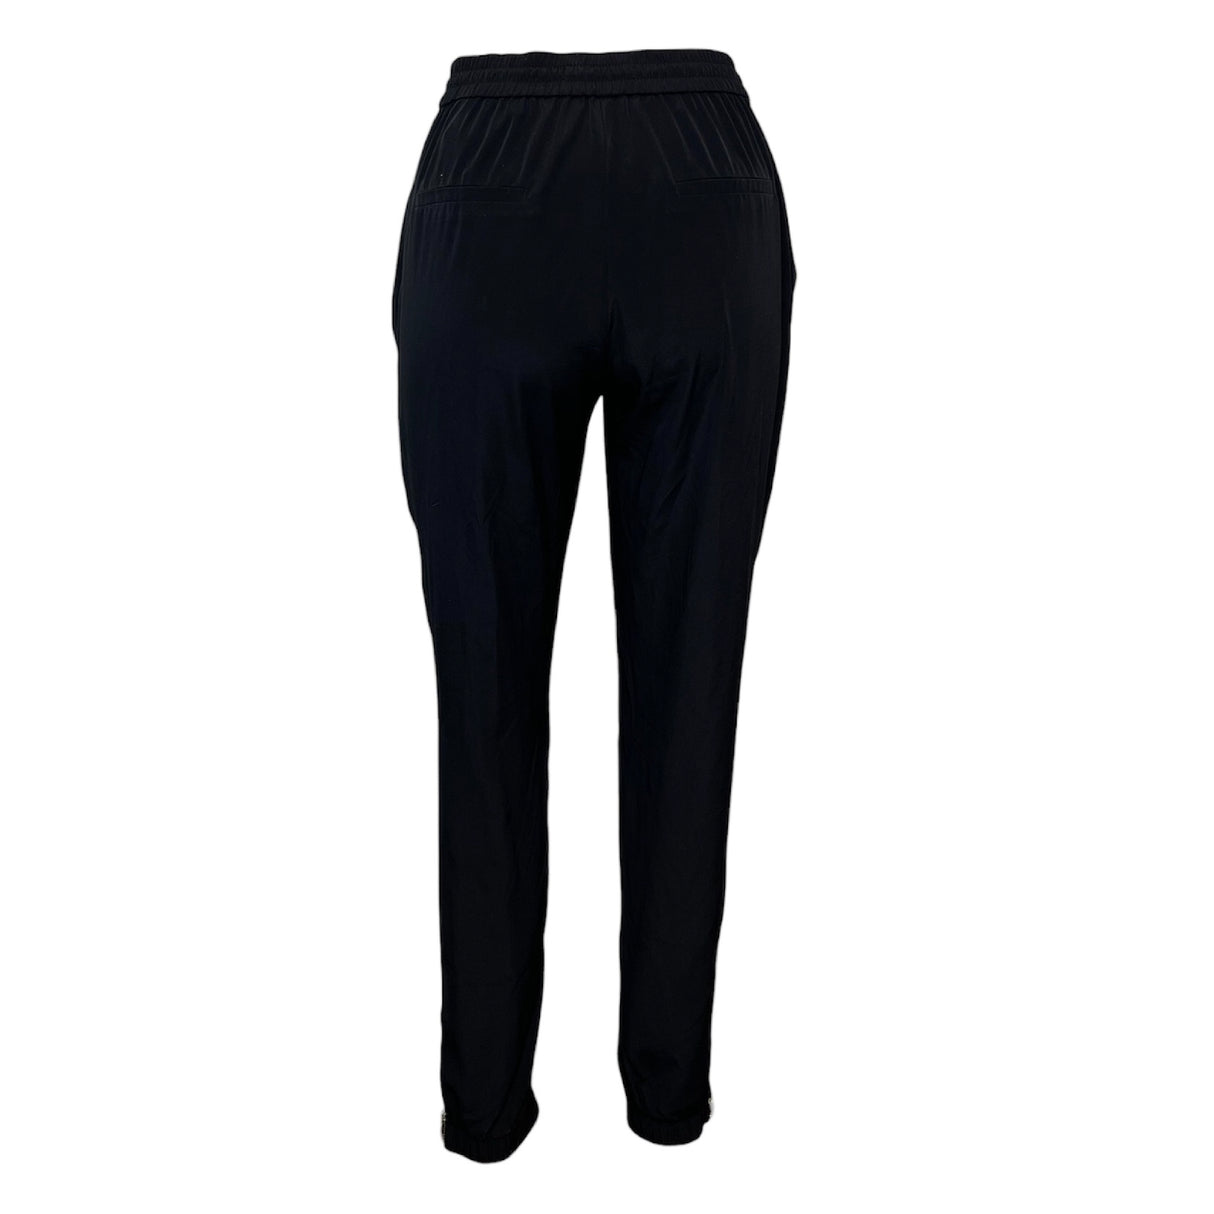 A Second Chance - Bershka L Black Pant Women - Delivery All Over Lebanon